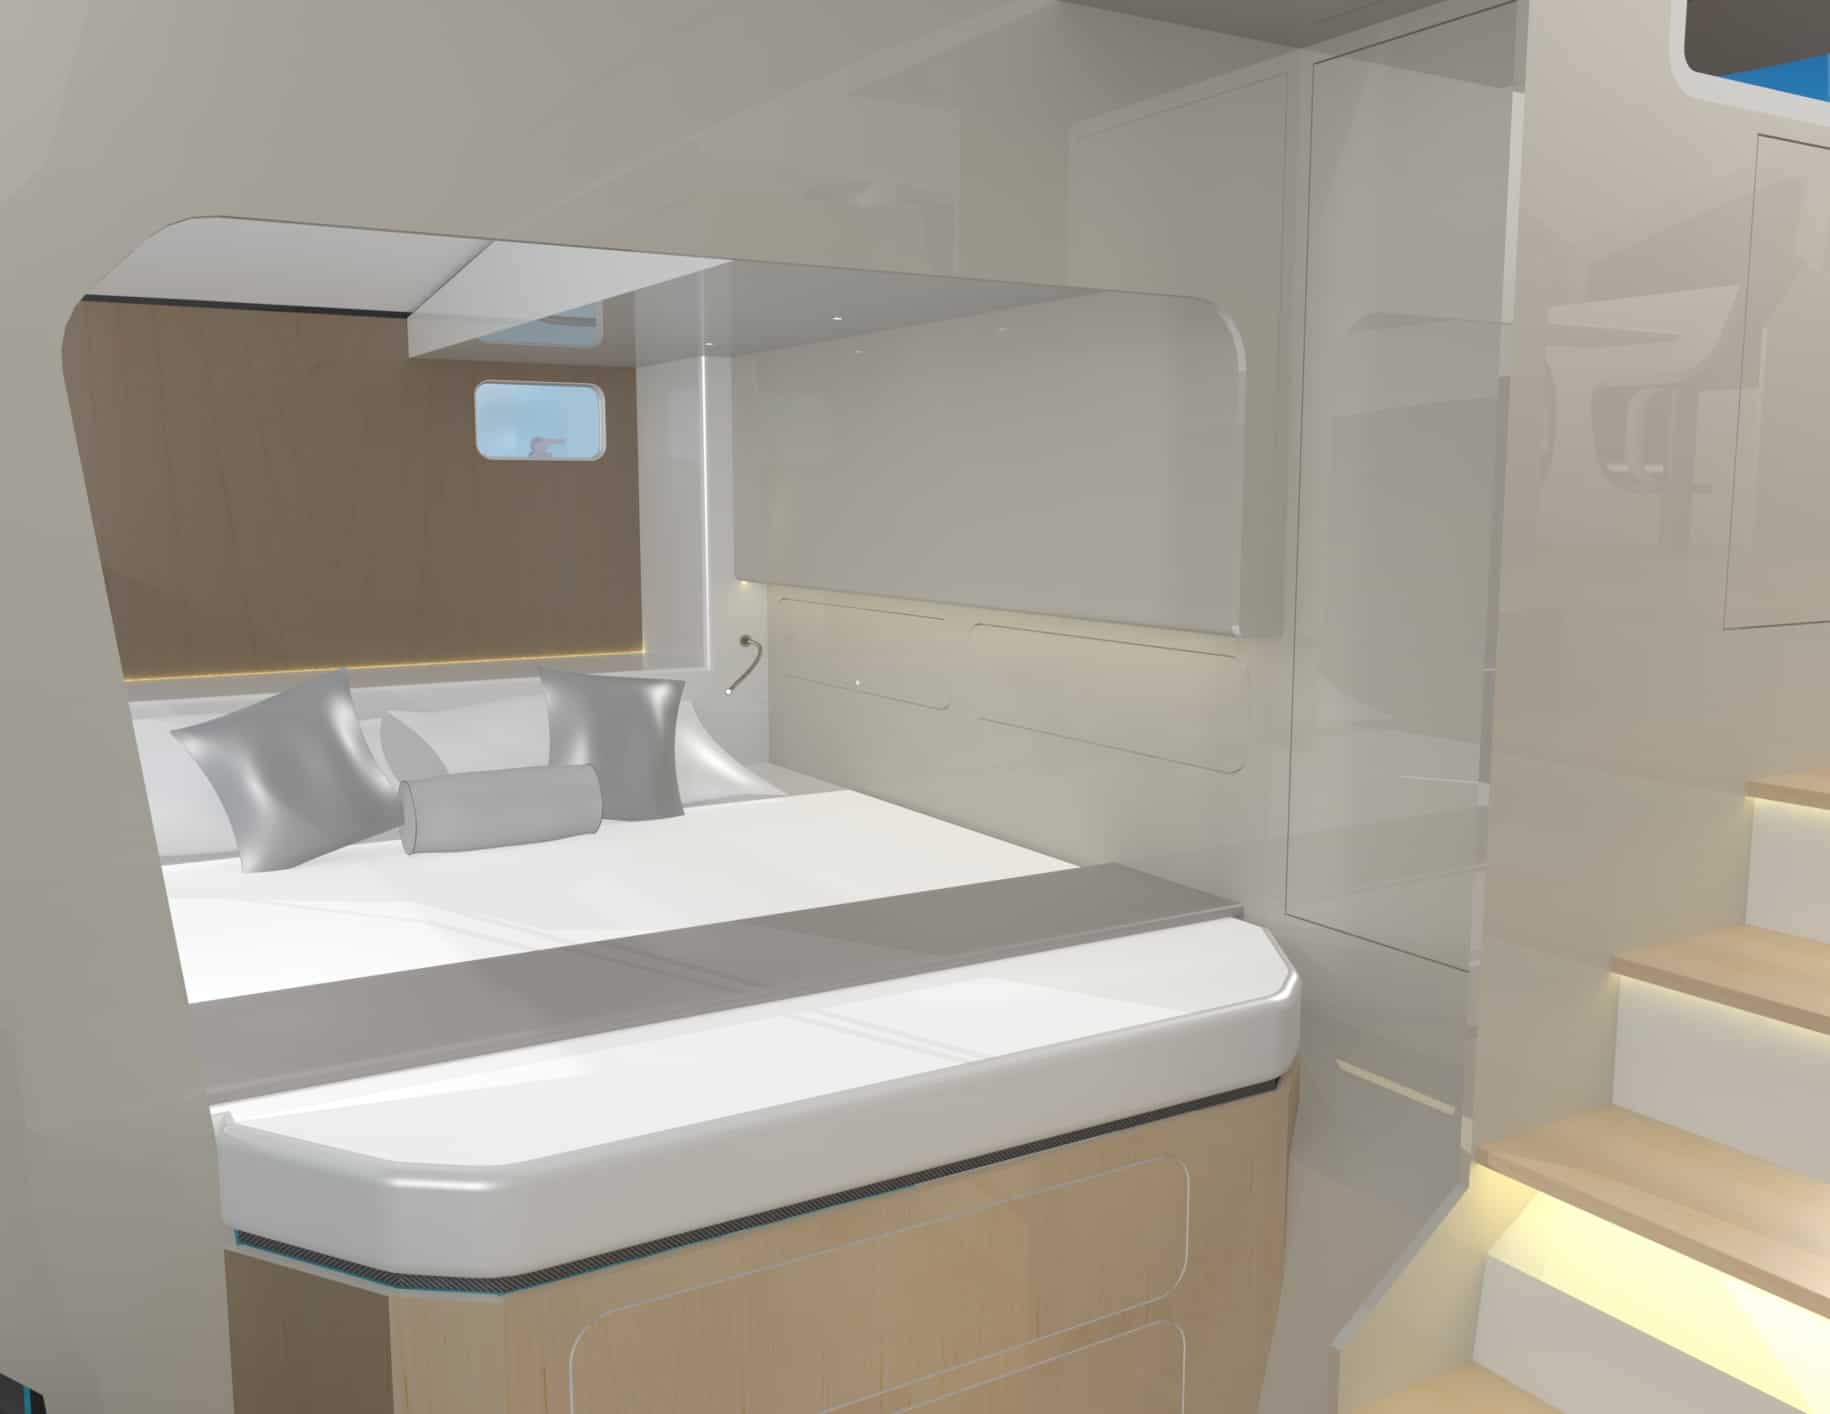 McConaghy S49 AFT Cabin